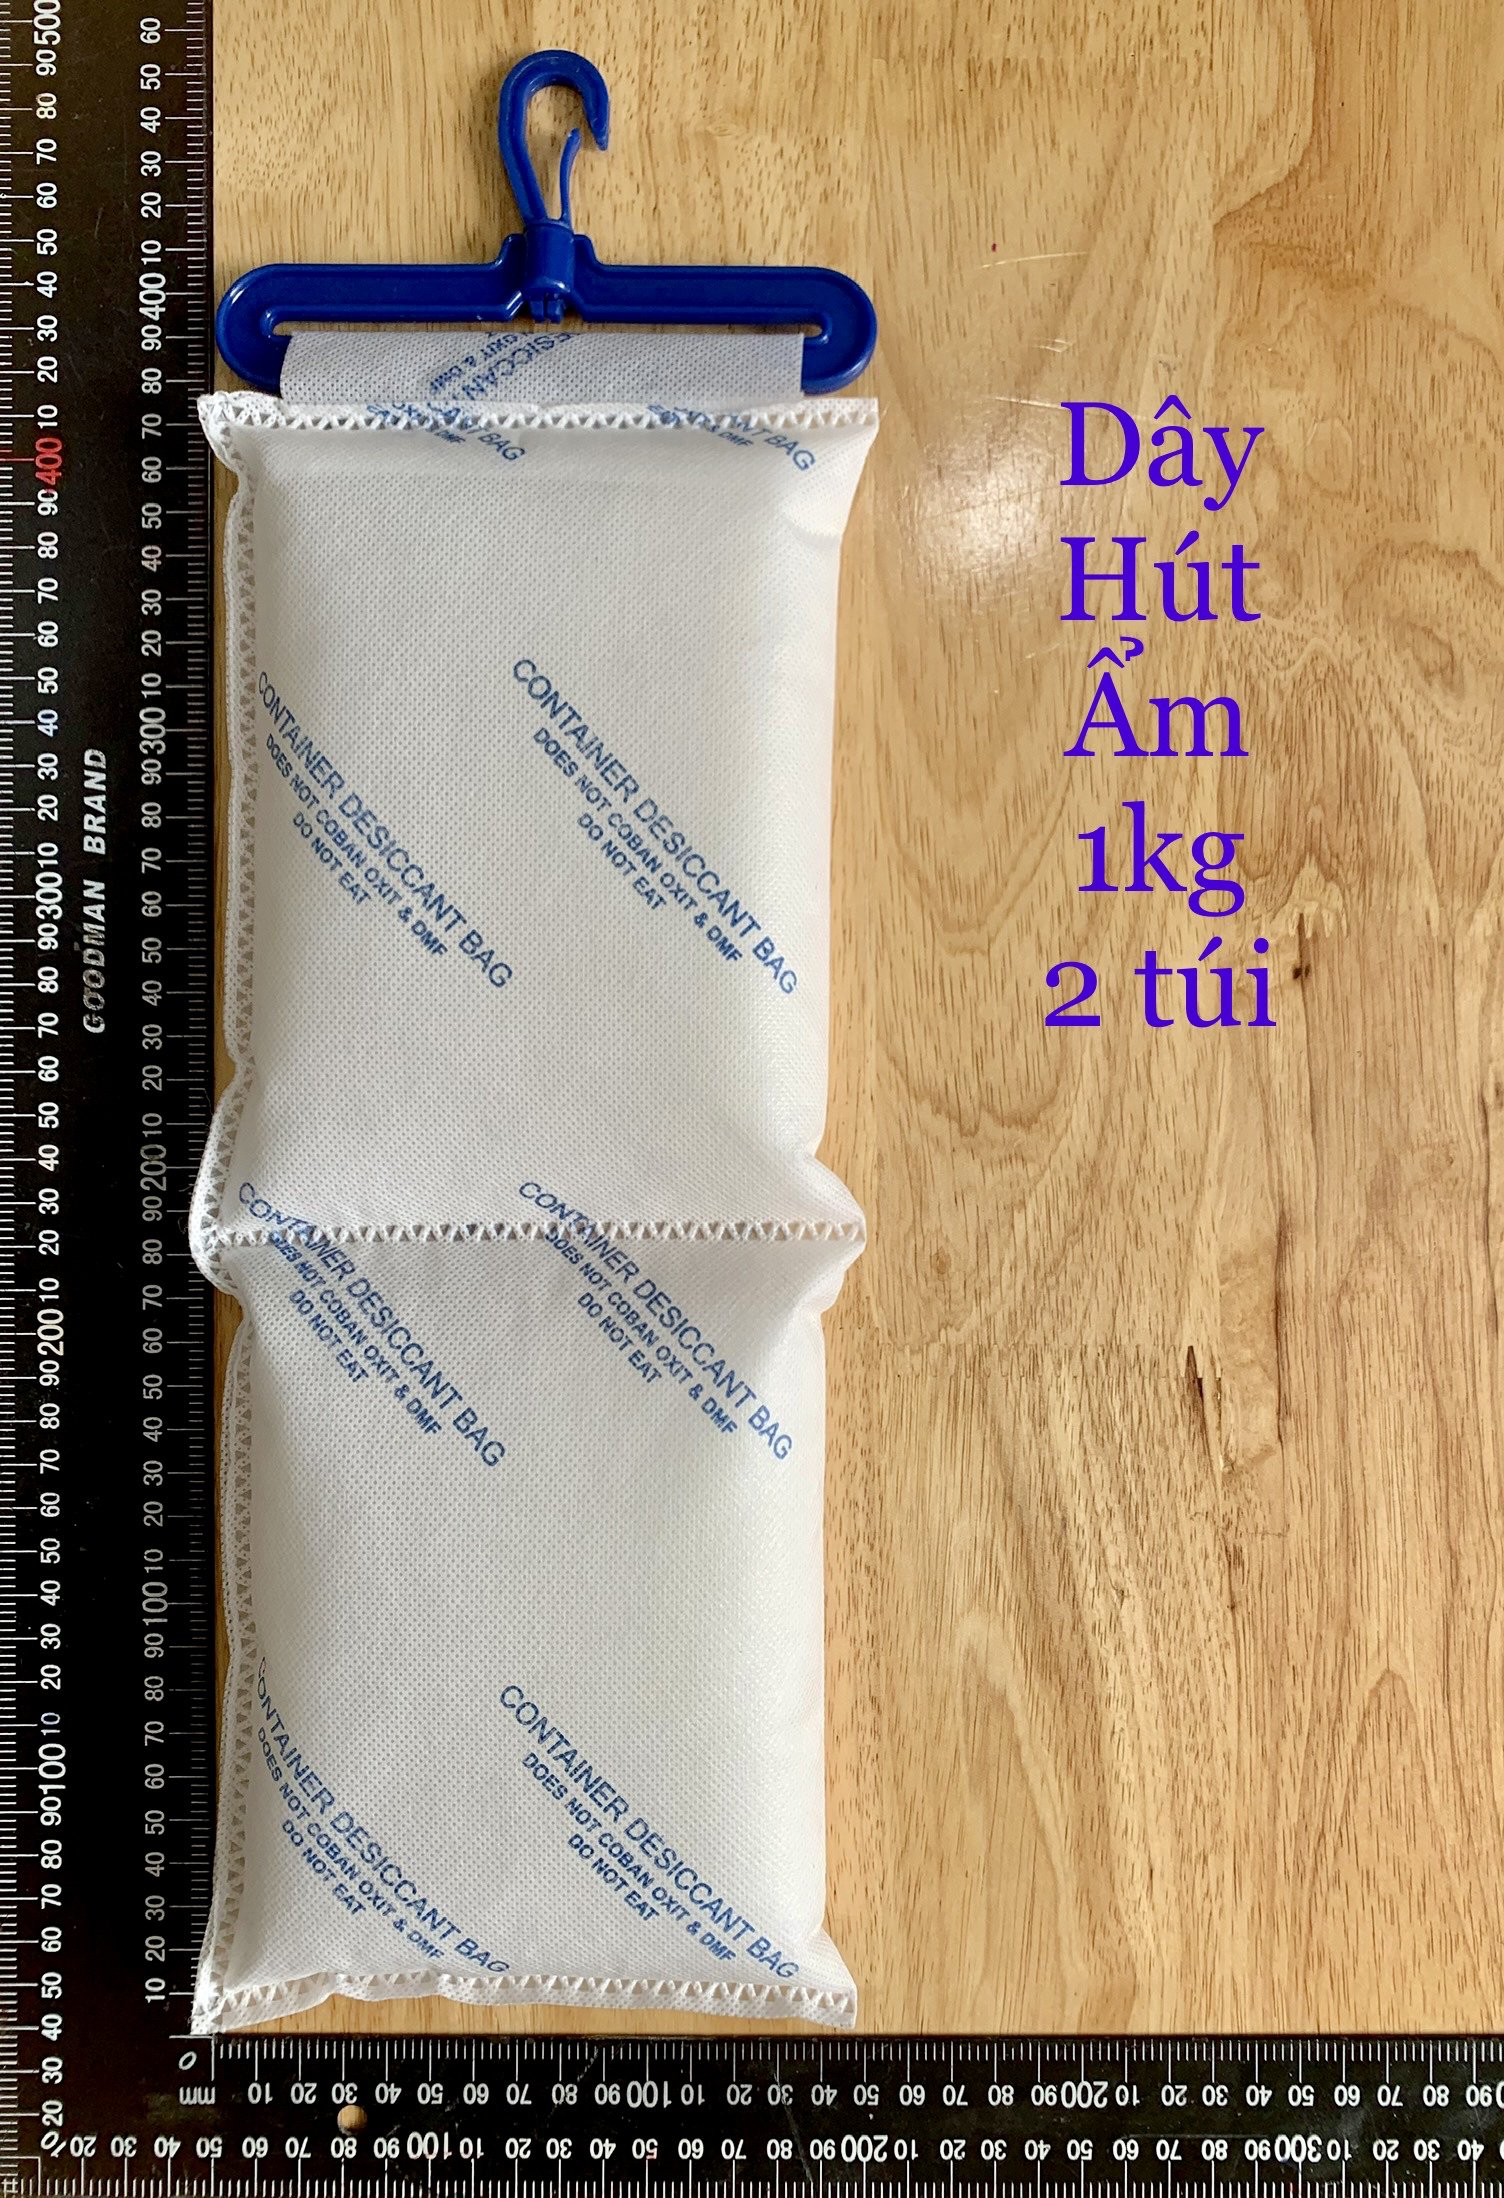 DÂY HÚT ẨM  SILICA GEL 1KG TREO CONTAINER